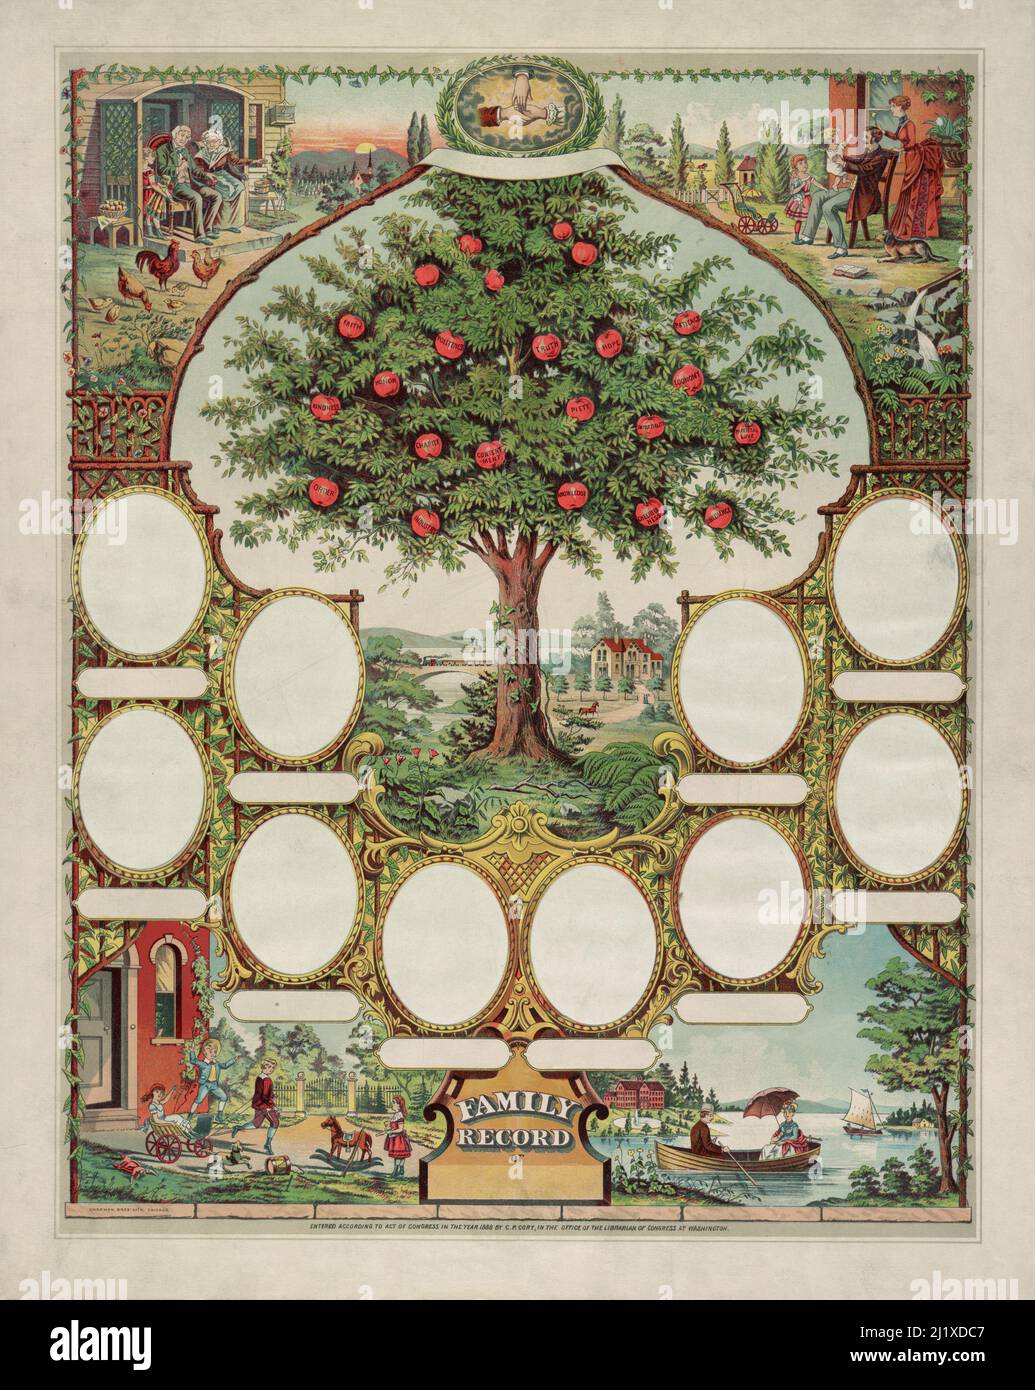 A vintage lithograph print circa 1888 showing a family tree chart with spaces for photos or portraits and illustrated with various family scenes and a large apple tree in the centre produced by Chapman Brothers of Chicago Stock Photo